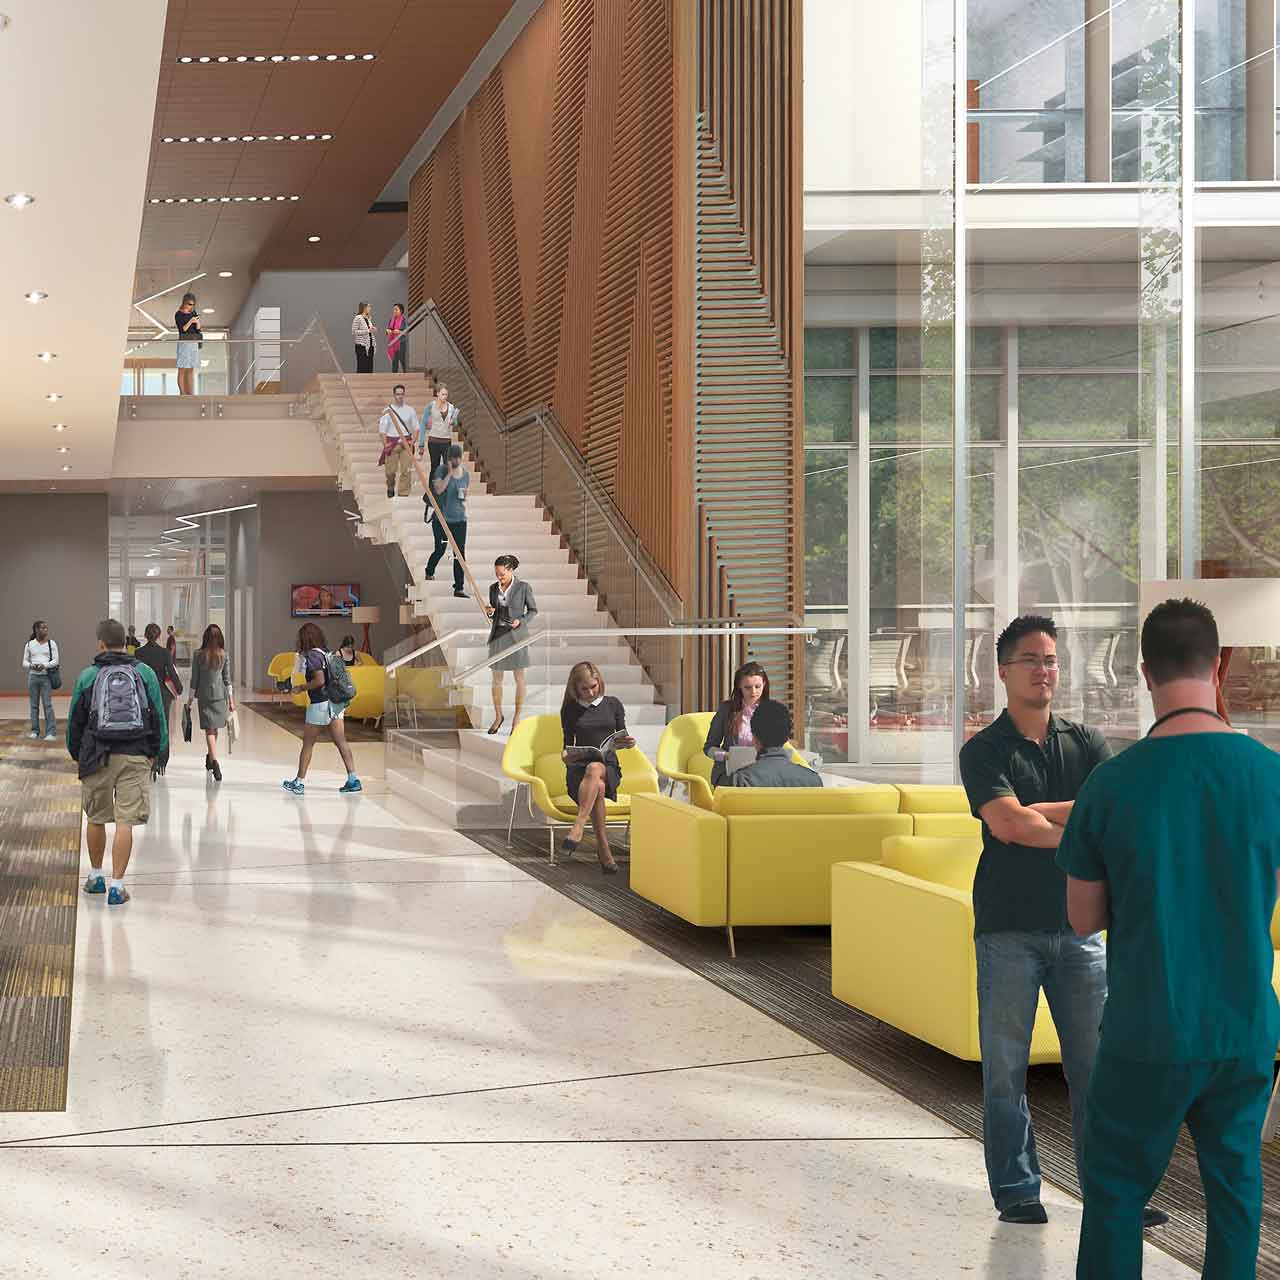 Architectural rendering depicting people moving through the interior of the School of Allied Health Professions building